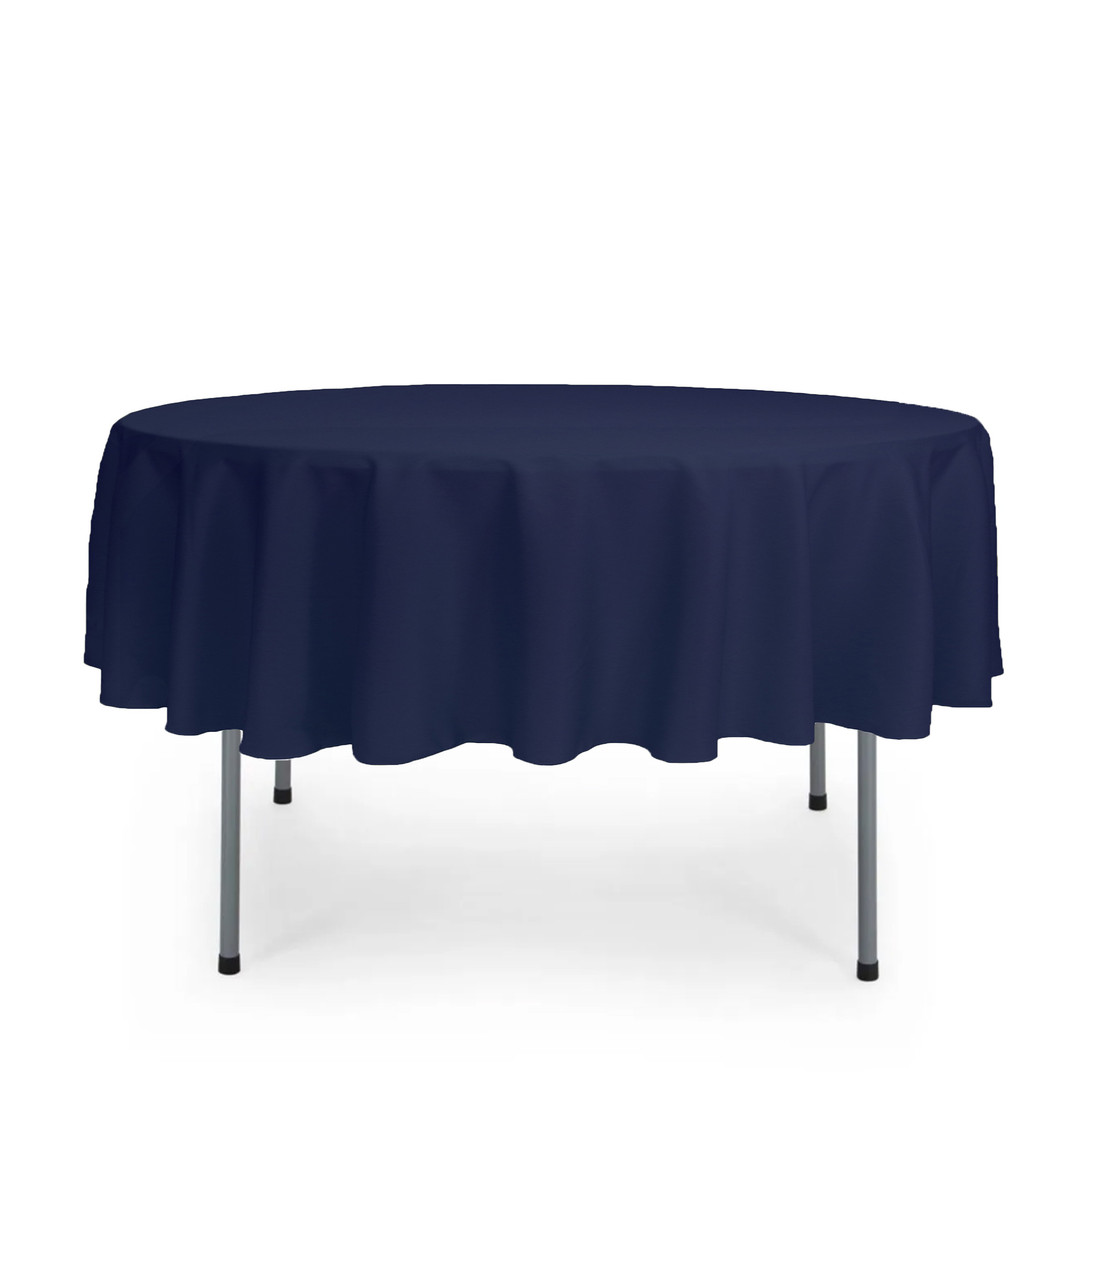 70 Inch Round Polyester Tablecloth Navy Blue Your Chair Covers Inc